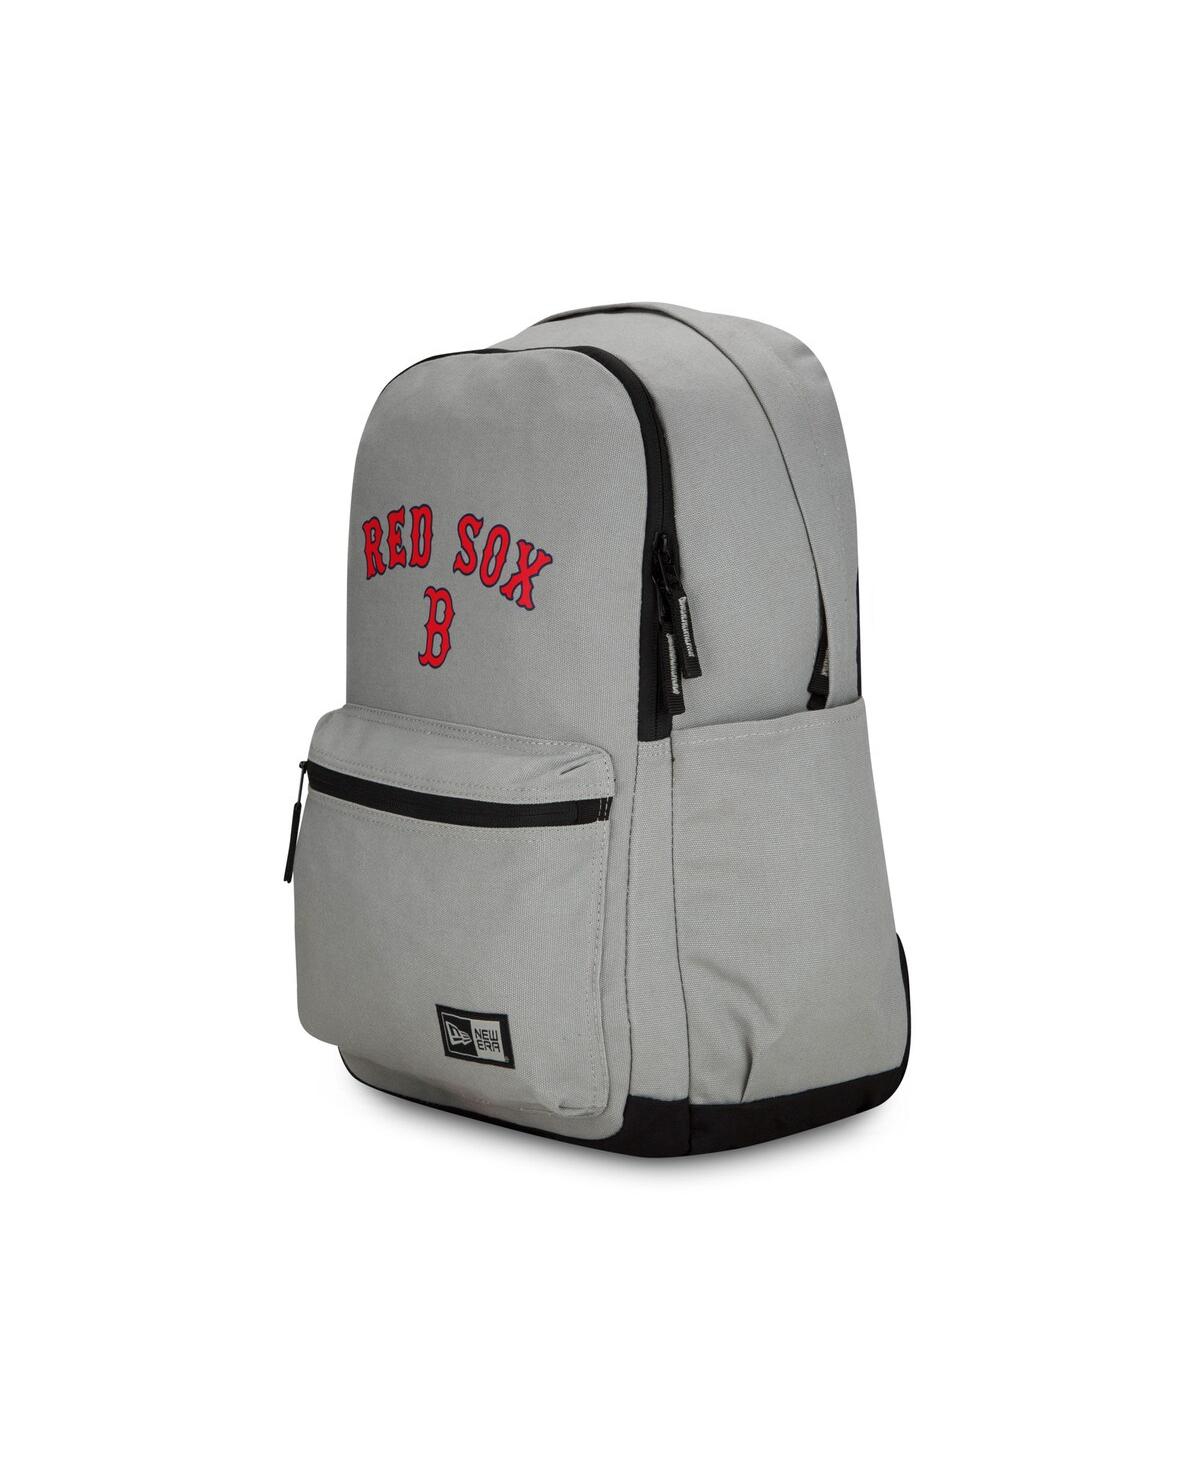 Men's and Women's New Era Boston Red Sox Throwback Backpack - Gray